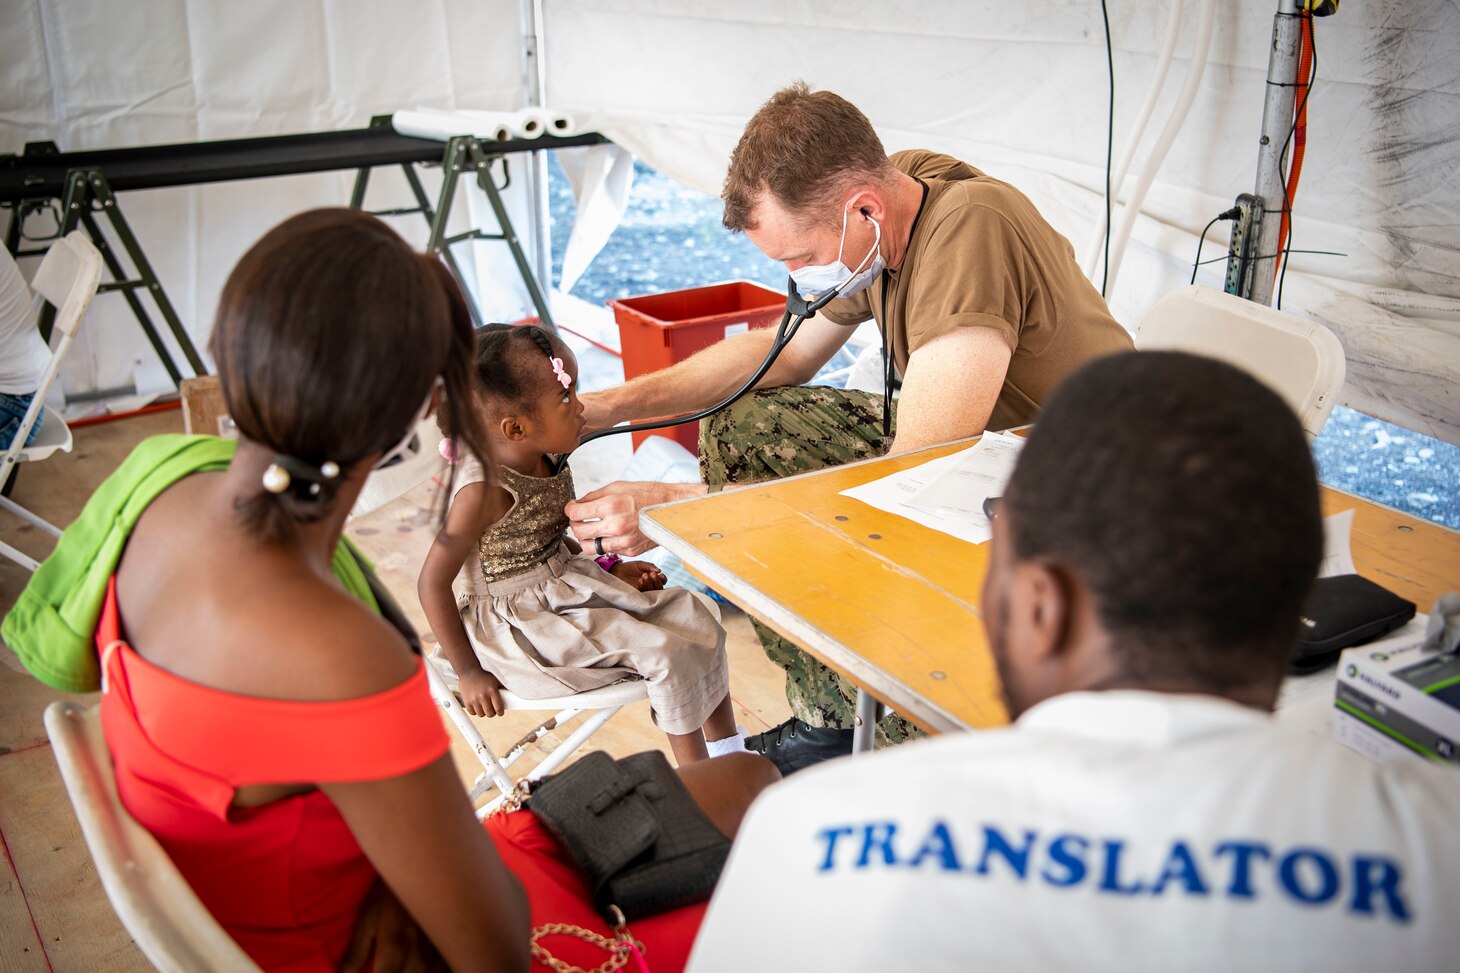 Cmdr. Michael Cunningham, a pediatric cardiologist, from Chesapeake, Virginia, provides medical care during Continuing Promise 2022 at a medical site in Jeremie, Haiti, Dec. 12, 2022. Comfort is deployed to U.S. 4th Fleet in support of CP22, a humanitarian assistance and goodwill mission conducting direct medical care, expeditionary veterinary care, and subject matter expert exchanges with five partner nations in the Caribbean, Central and South America.